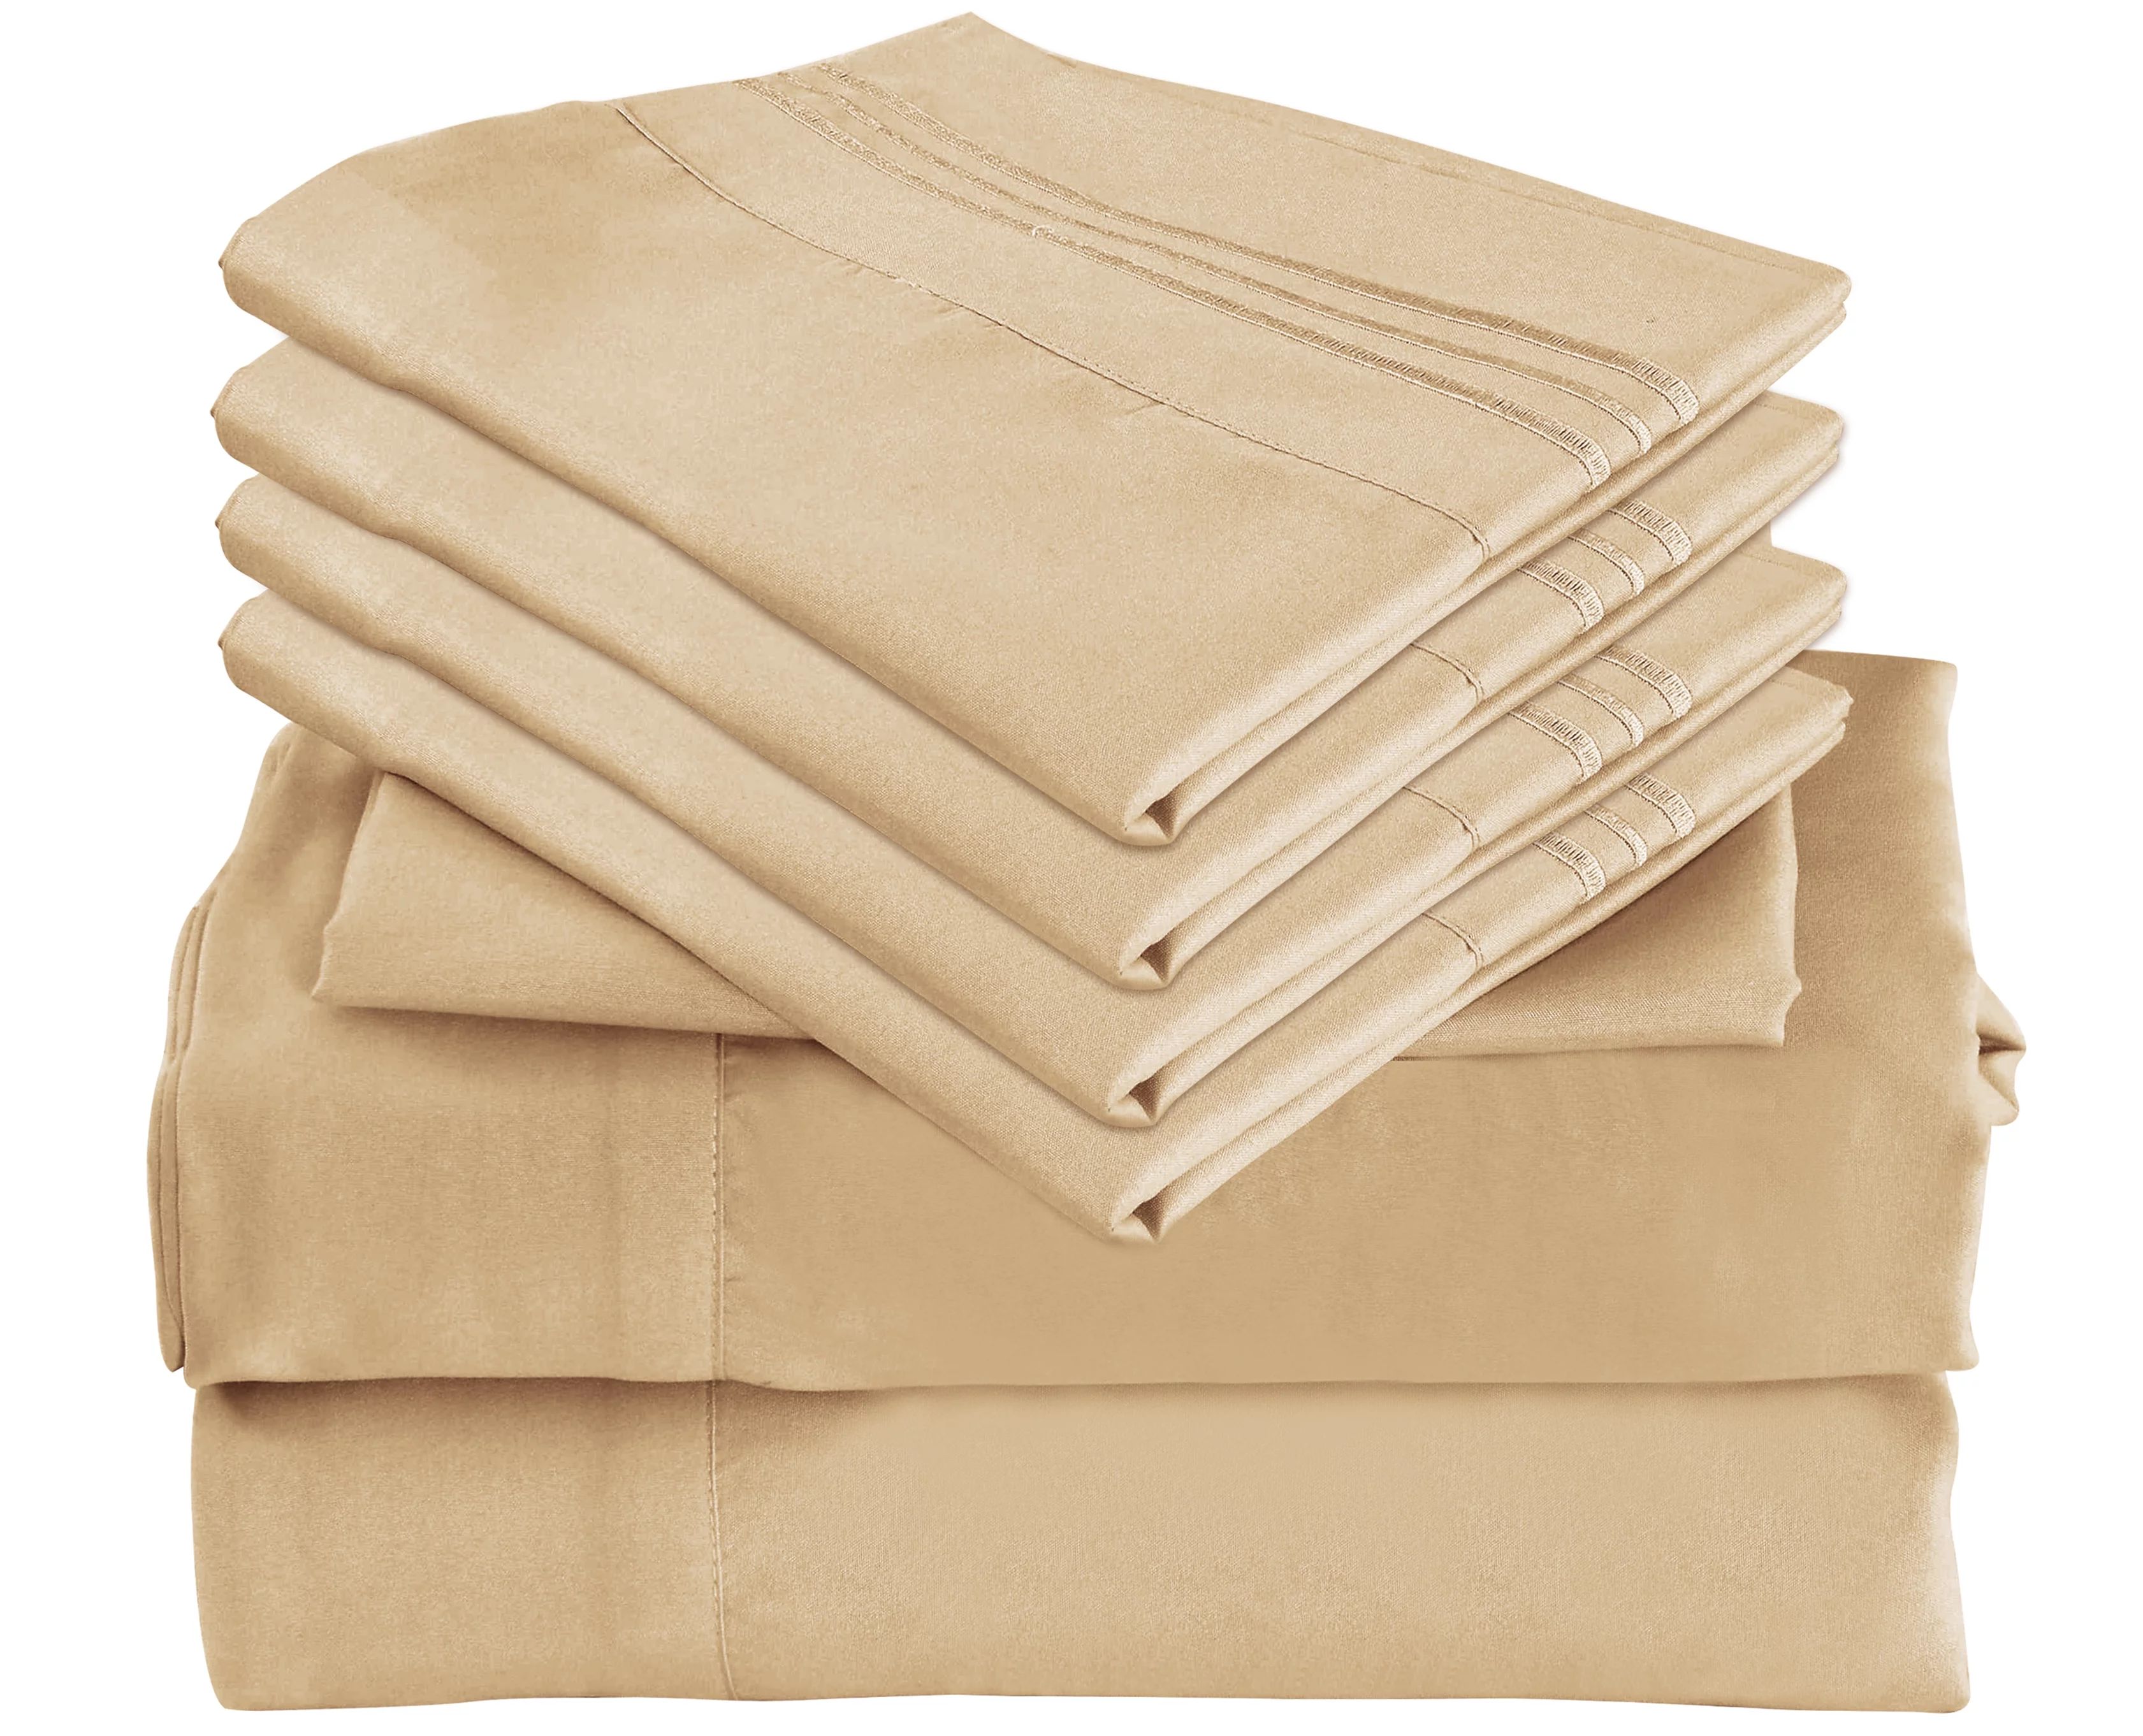 6 Piece Luxury King Size Rayon Made From Bamboo Sheets Set- King Beige Sheets, Softer Than Cotton... | Walmart (US)